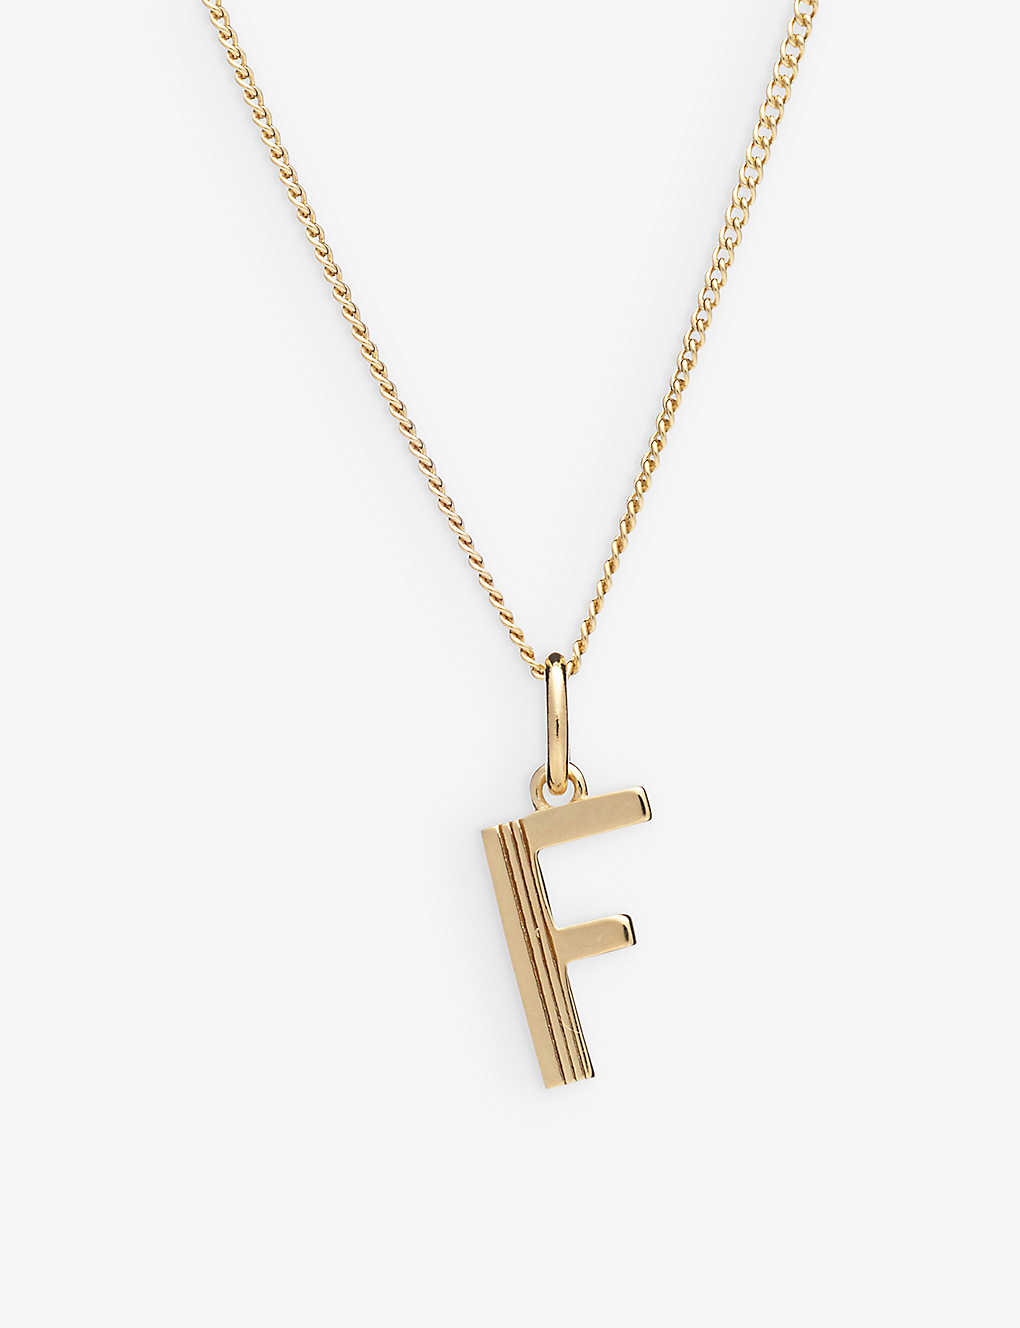 Rachel Jackson Art Deco F Initial Gold-plated Sterling Silver Necklace In 22 Carat Gold Plated